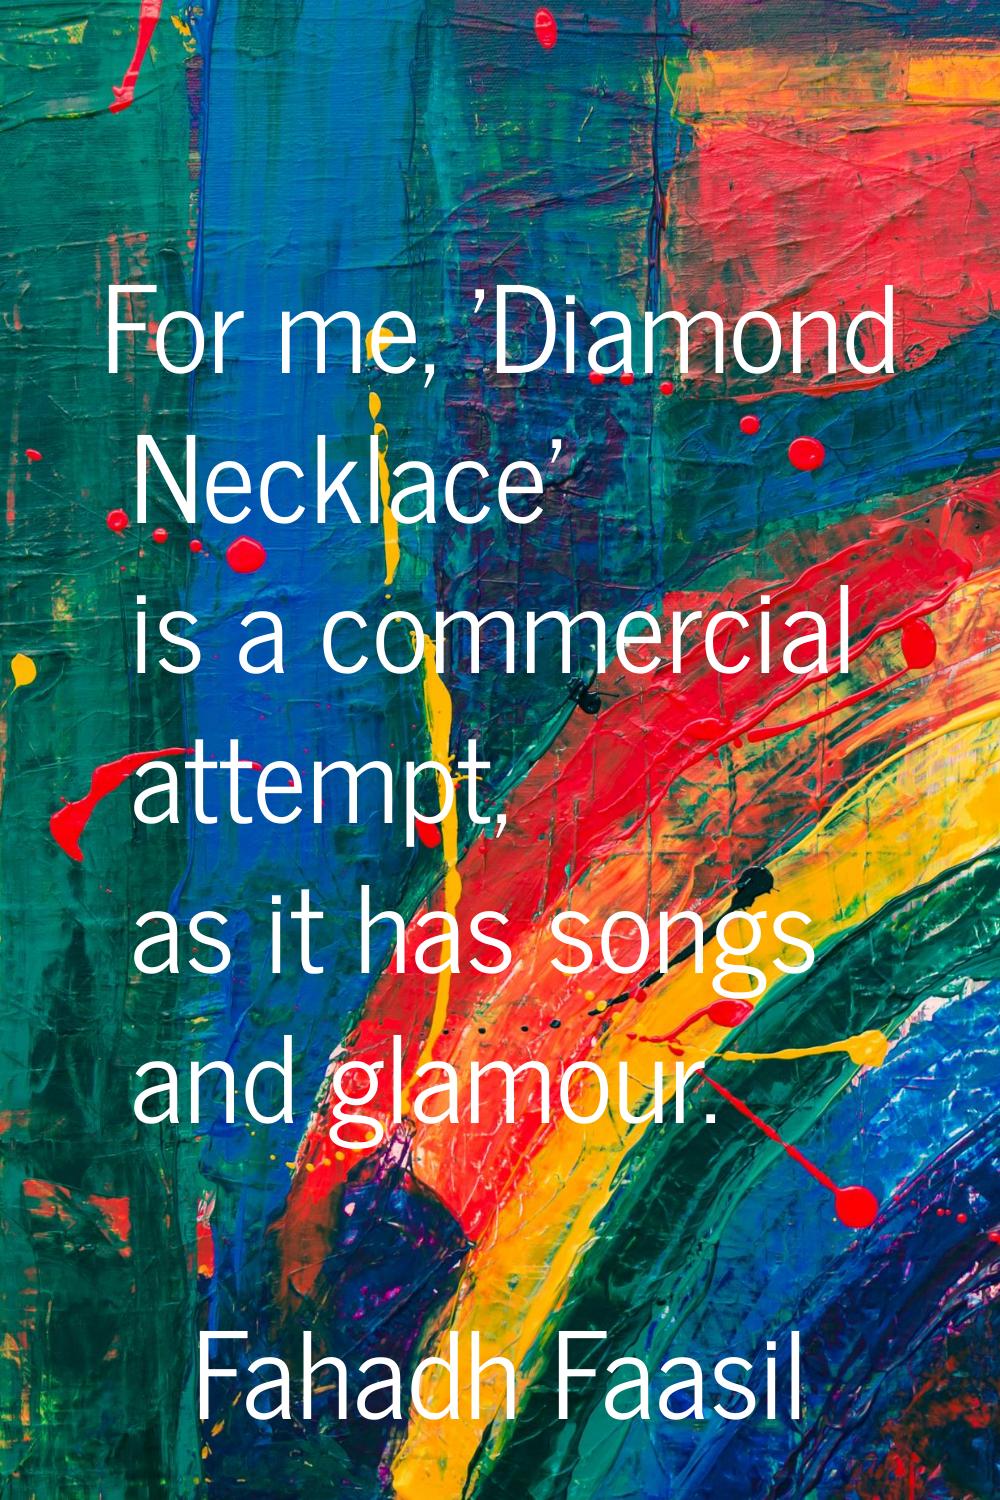 For me, 'Diamond Necklace' is a commercial attempt, as it has songs and glamour.